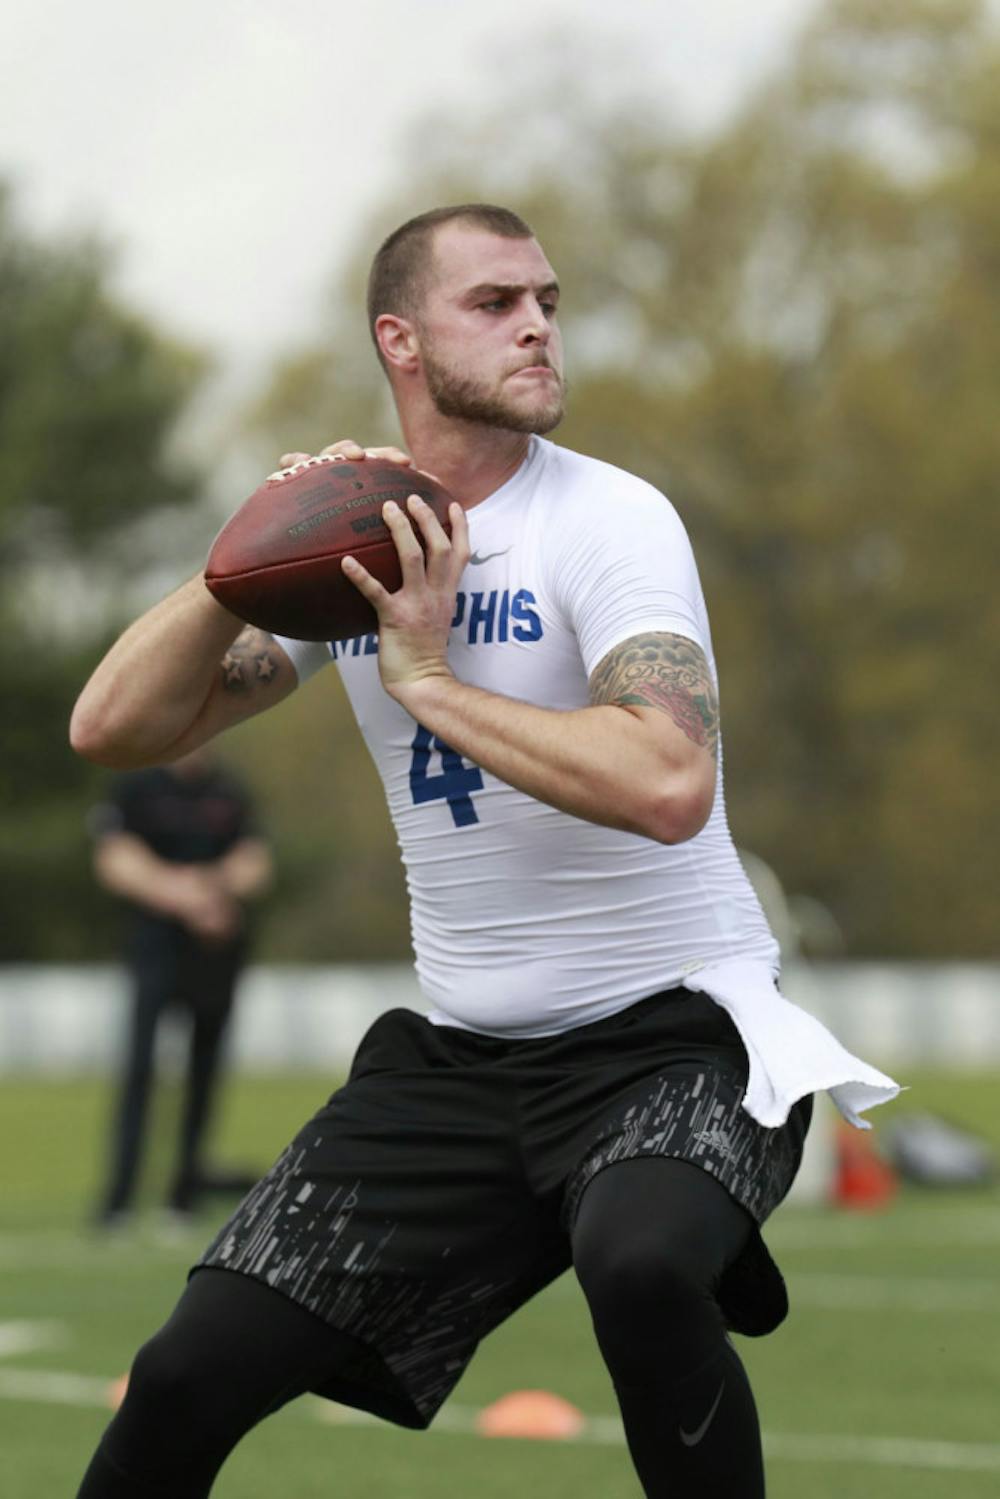 <p>Former Tiger quarterback Riley Ferguson gets ready to throw a pass. The NFL prospect worked out for scouts at the University of Memphis Pro Day on Tuesday.</p>